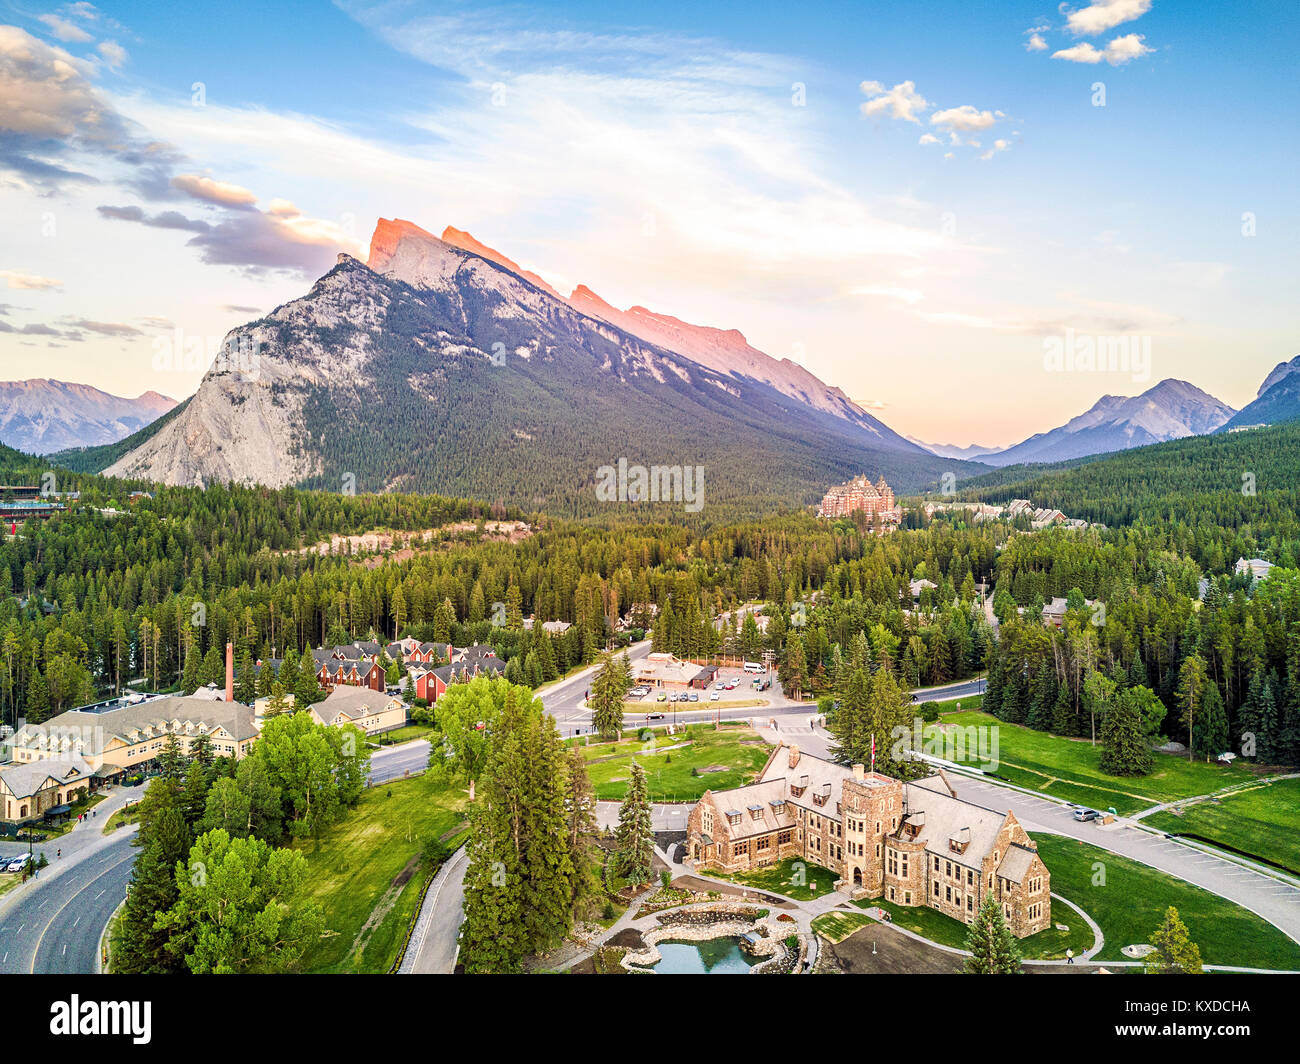 Cityscape of Banff in canadian Rocky Mountains,Alberta,Canada Stock Photo